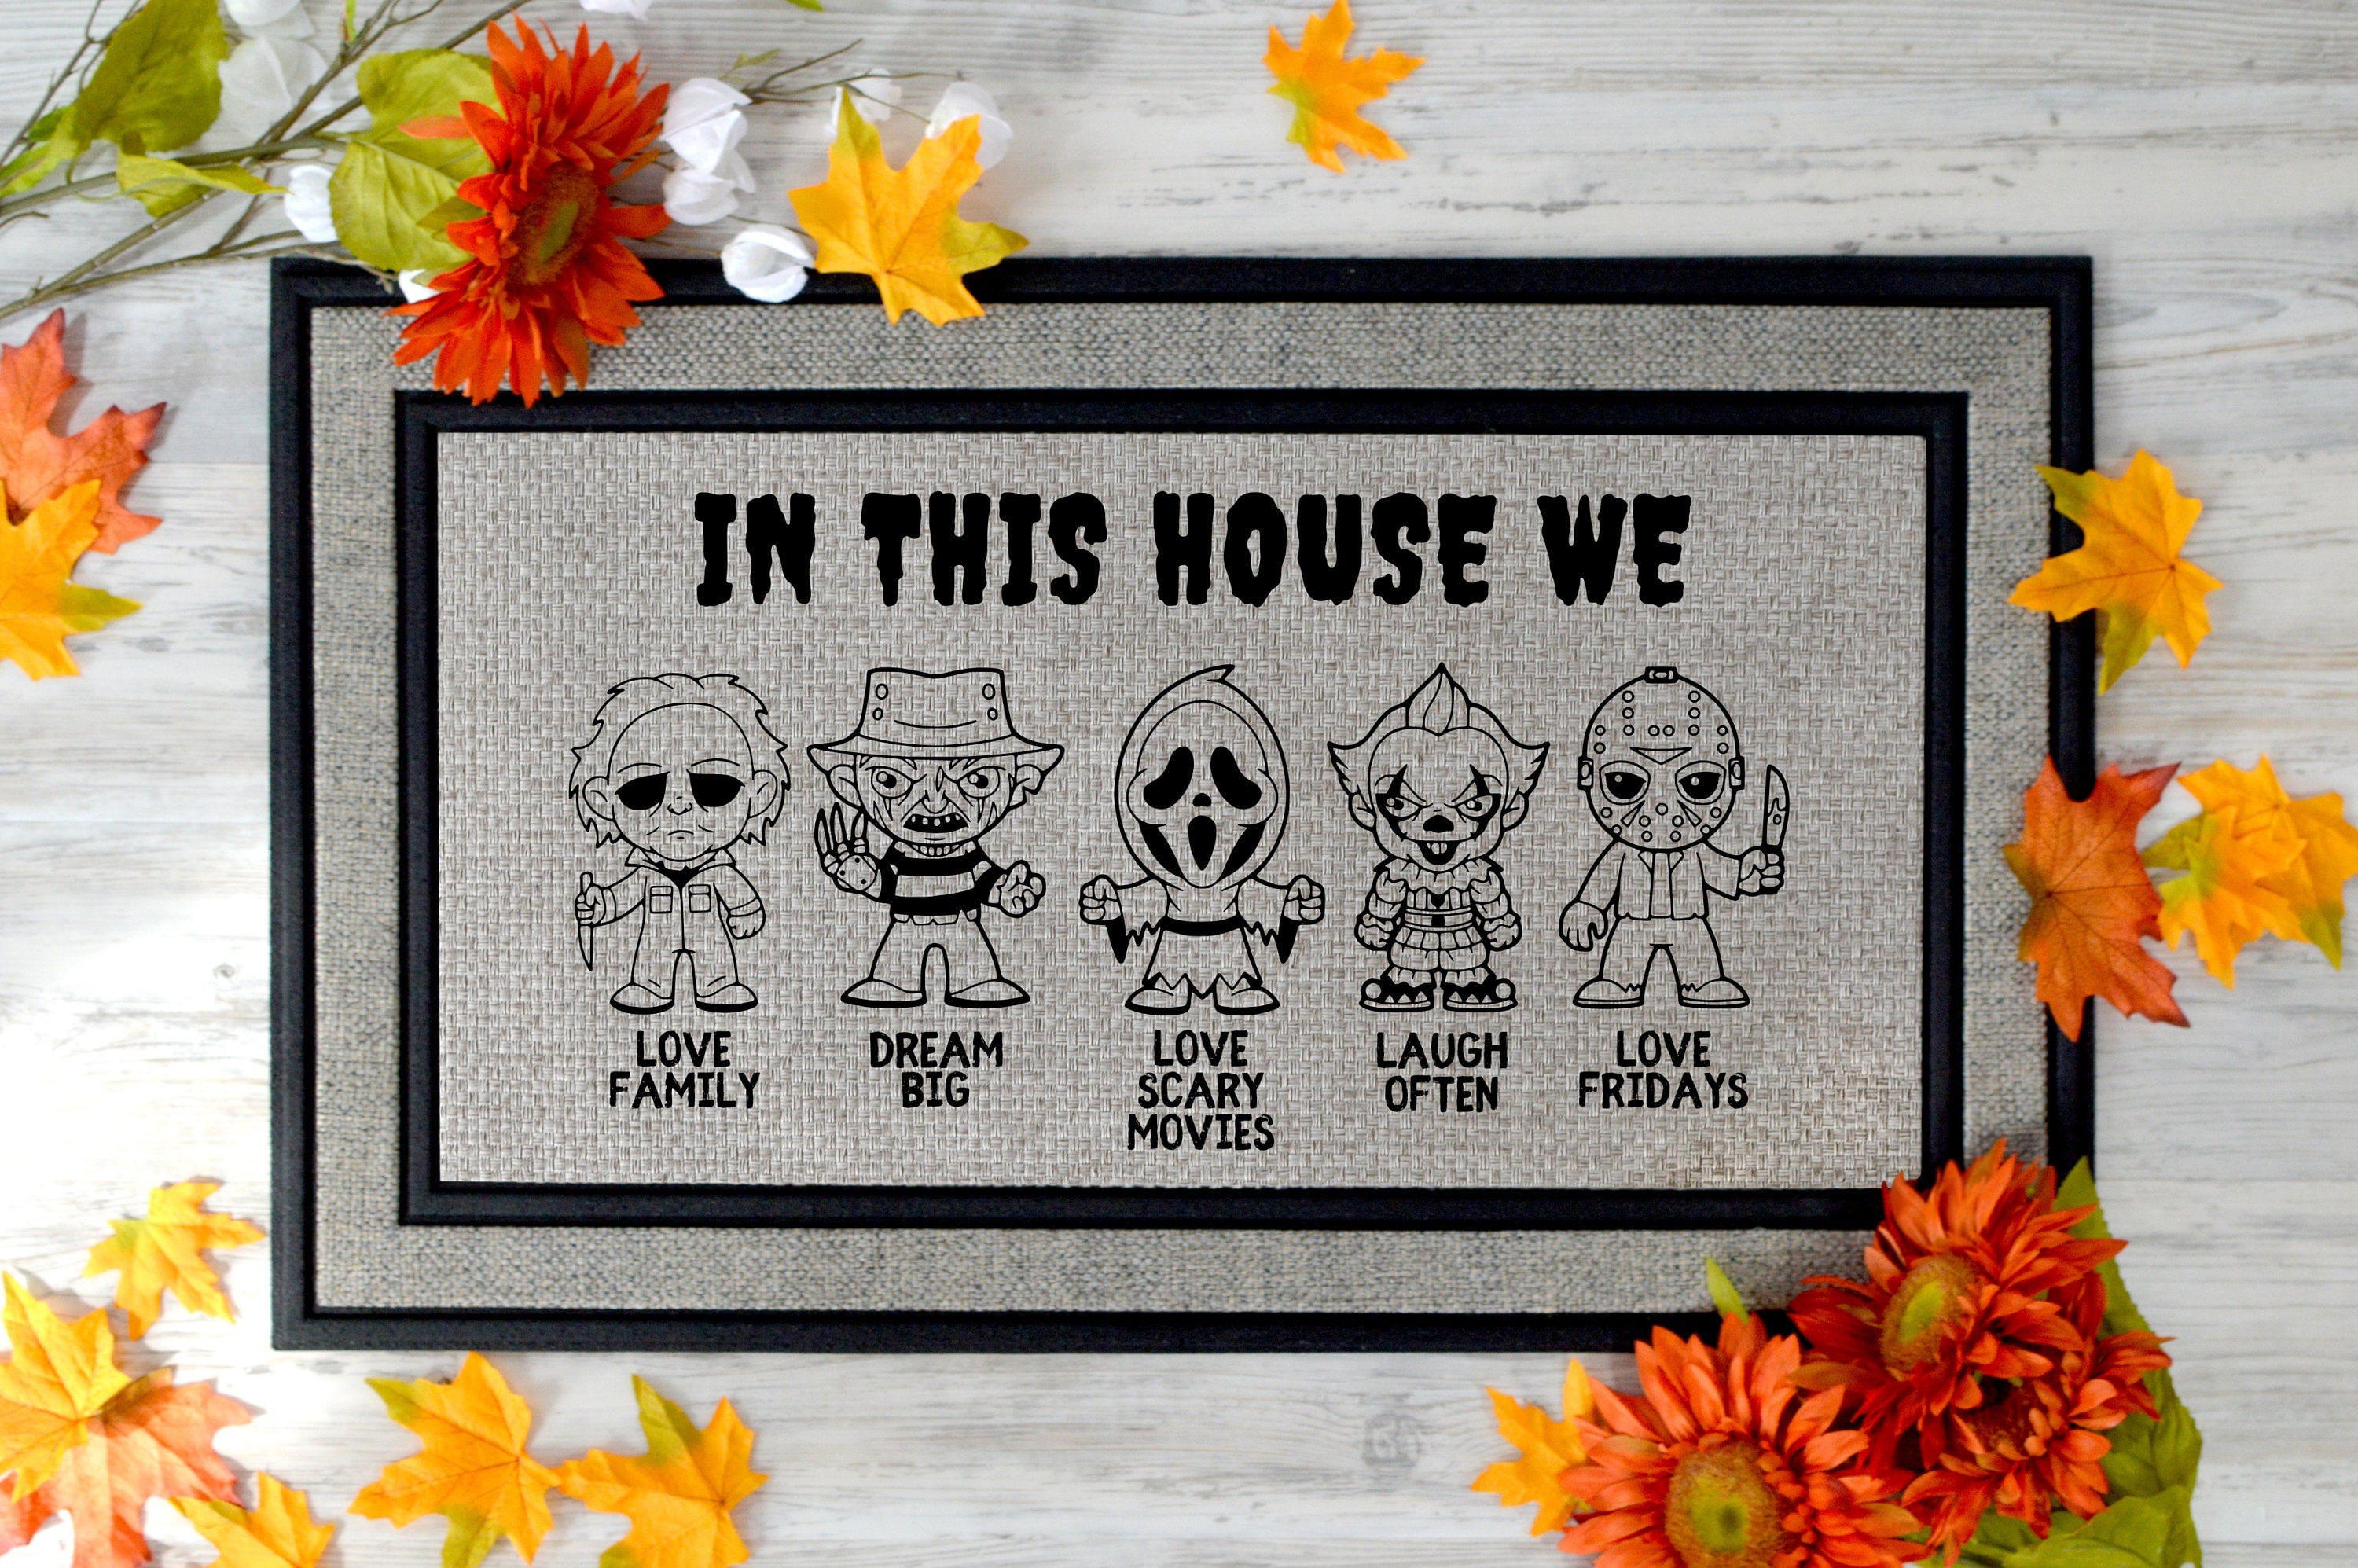 In This House We, Horror Doormat, Horror Movies, Fall Decor, Home Decor, Personalized Doormat, Halloween Doormat, Scary Movies, Halloween